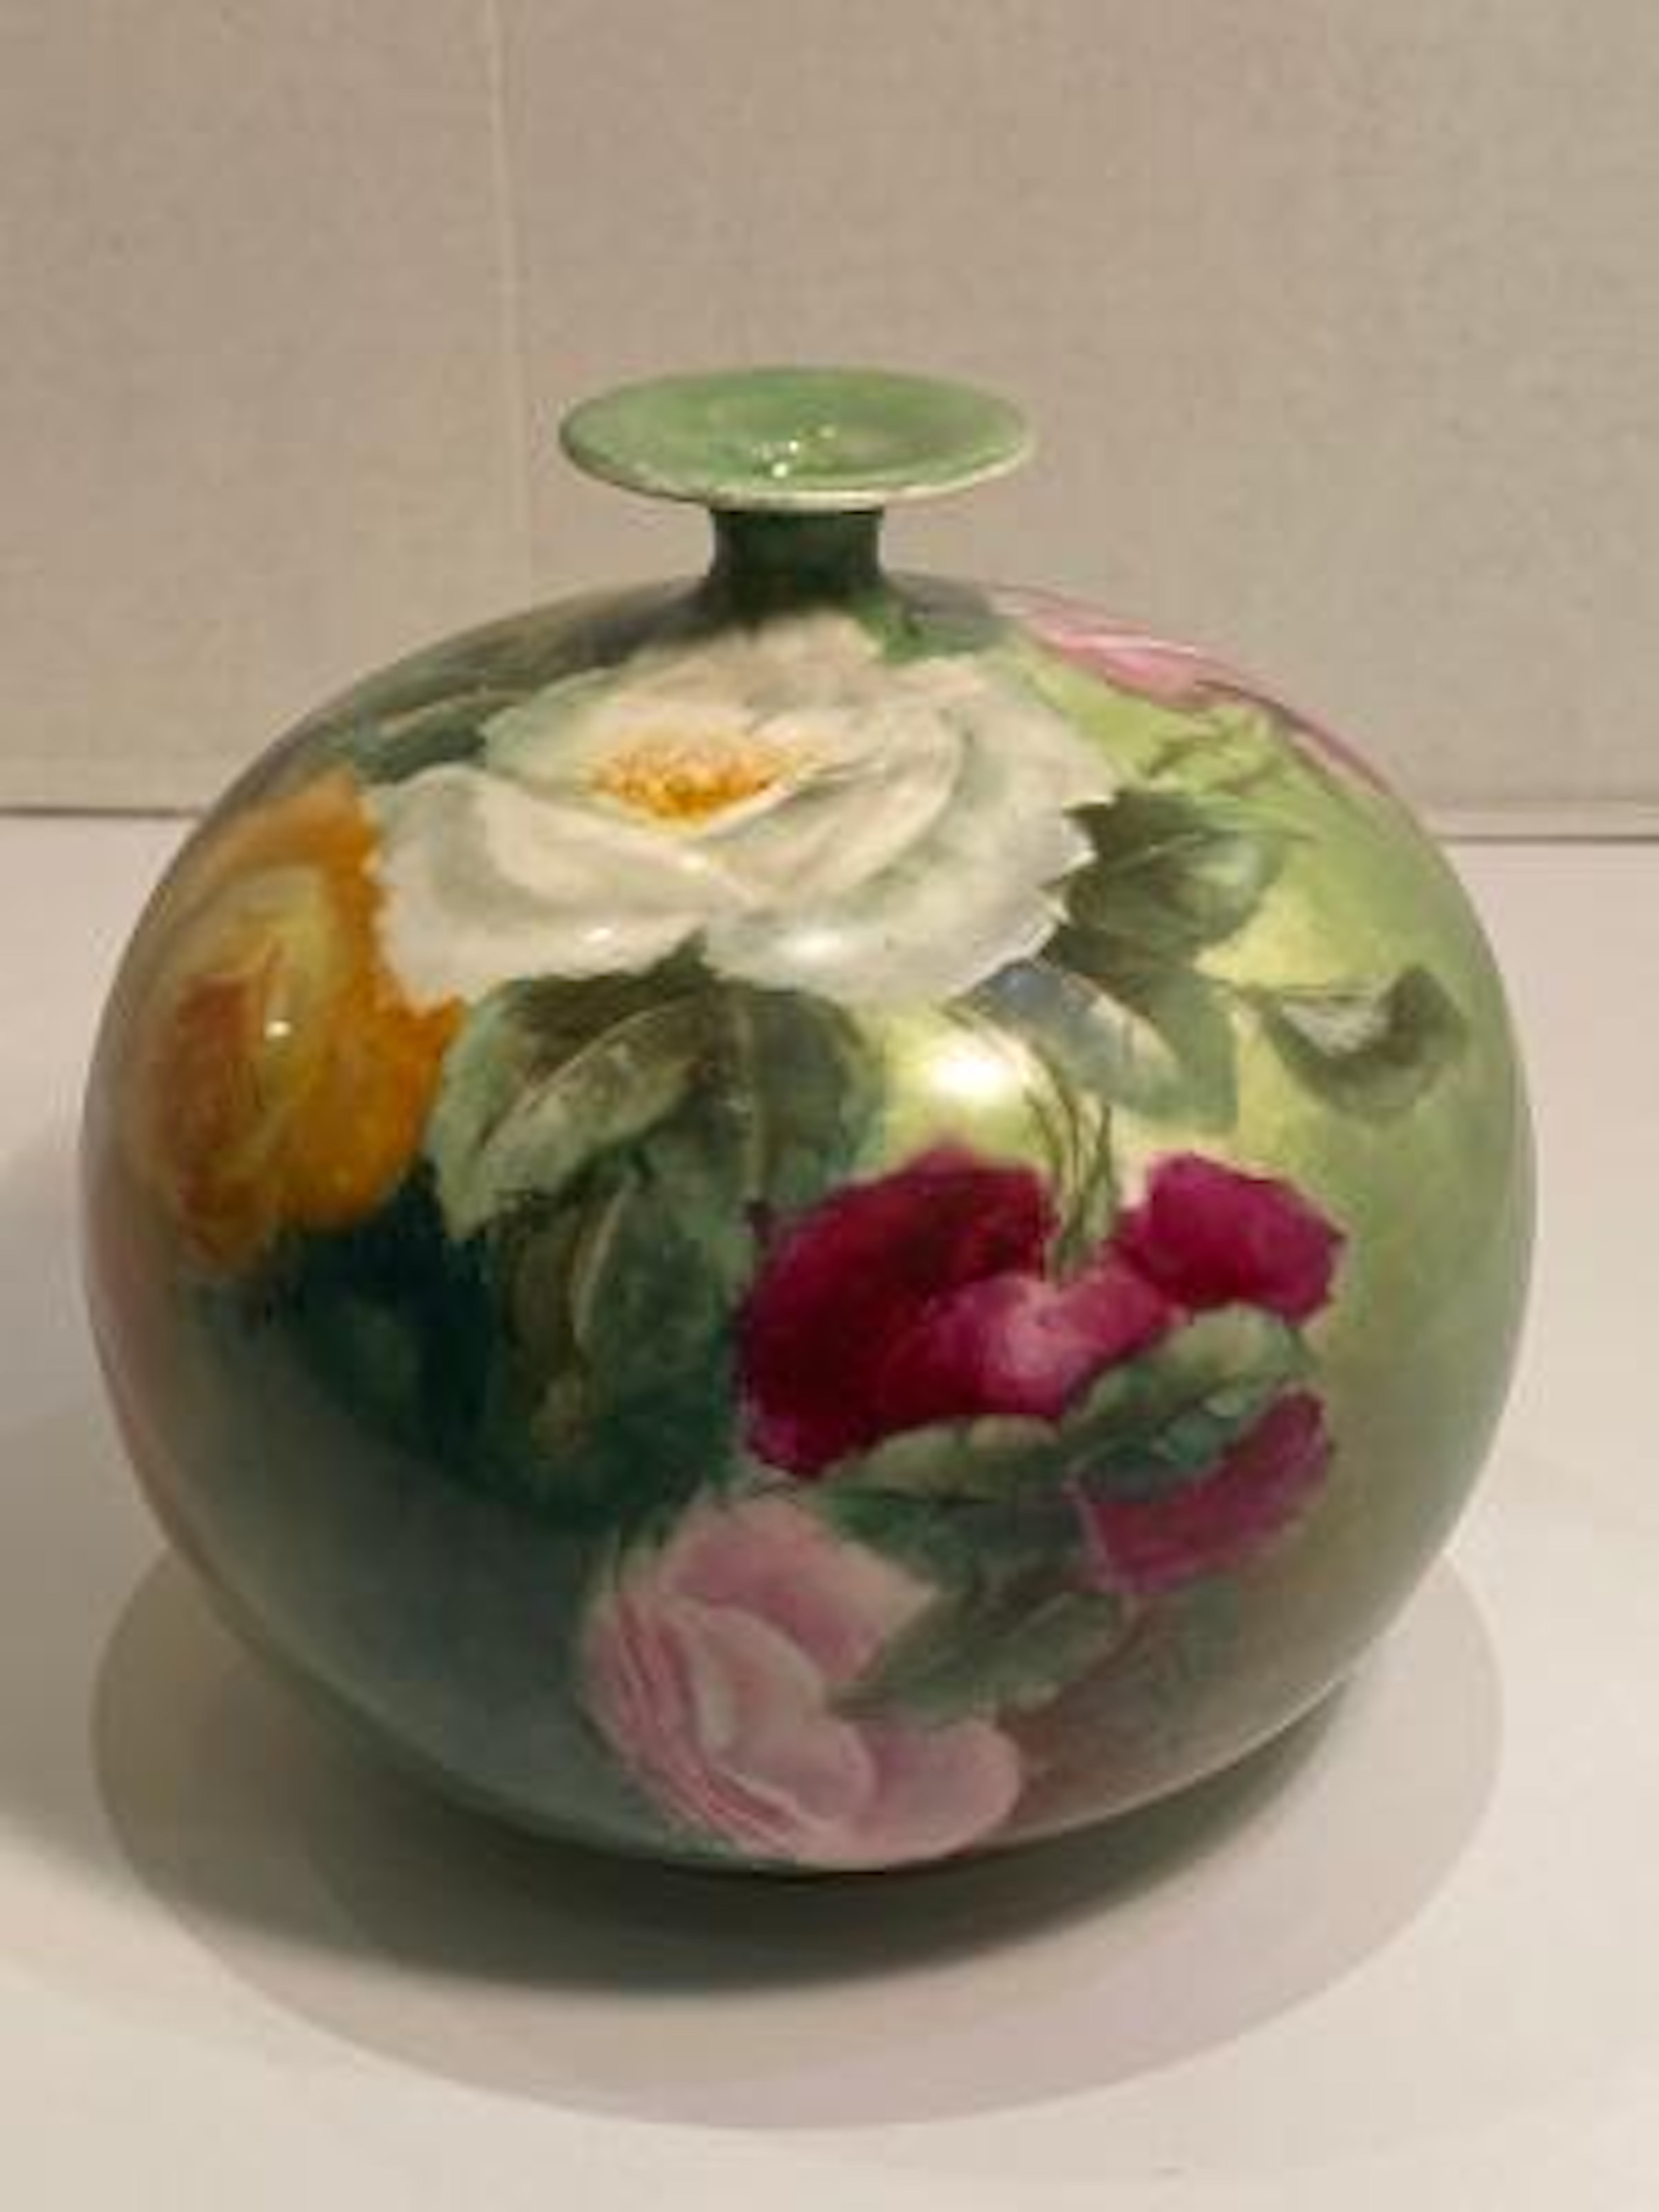 Exquisitely handmade and hand painted, turn of the century Victorian era antique porcelain vase features gorgeous, life like roses in full bloom, rosebuds and leaves, rendered in the naturalistic floral style popular in late nineteenth and early